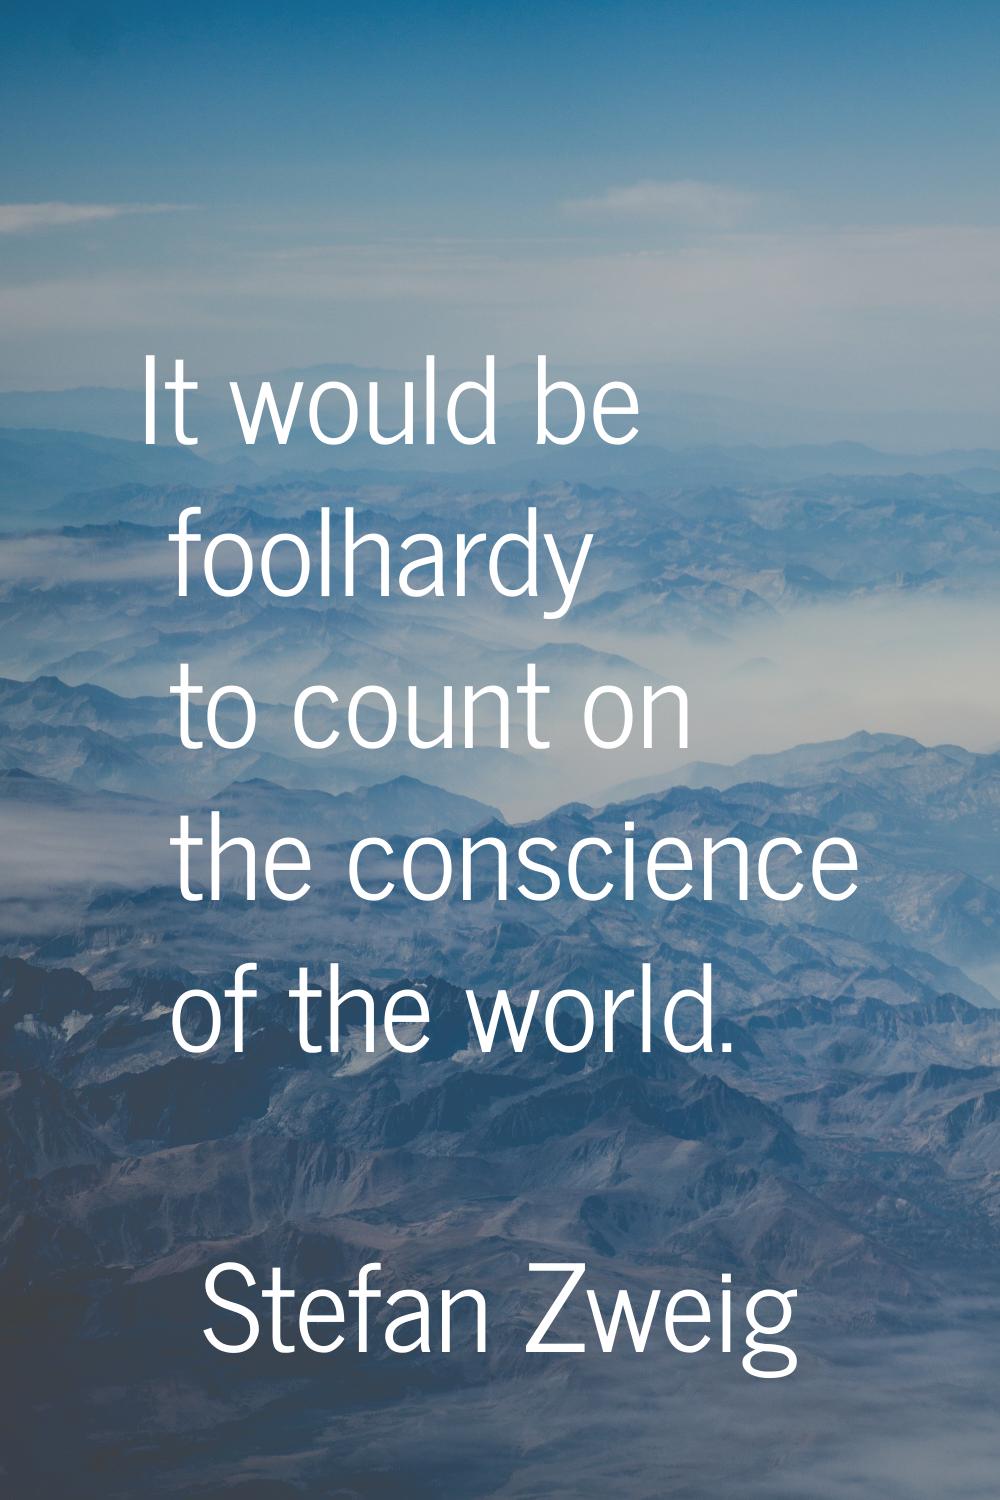 It would be foolhardy to count on the conscience of the world.